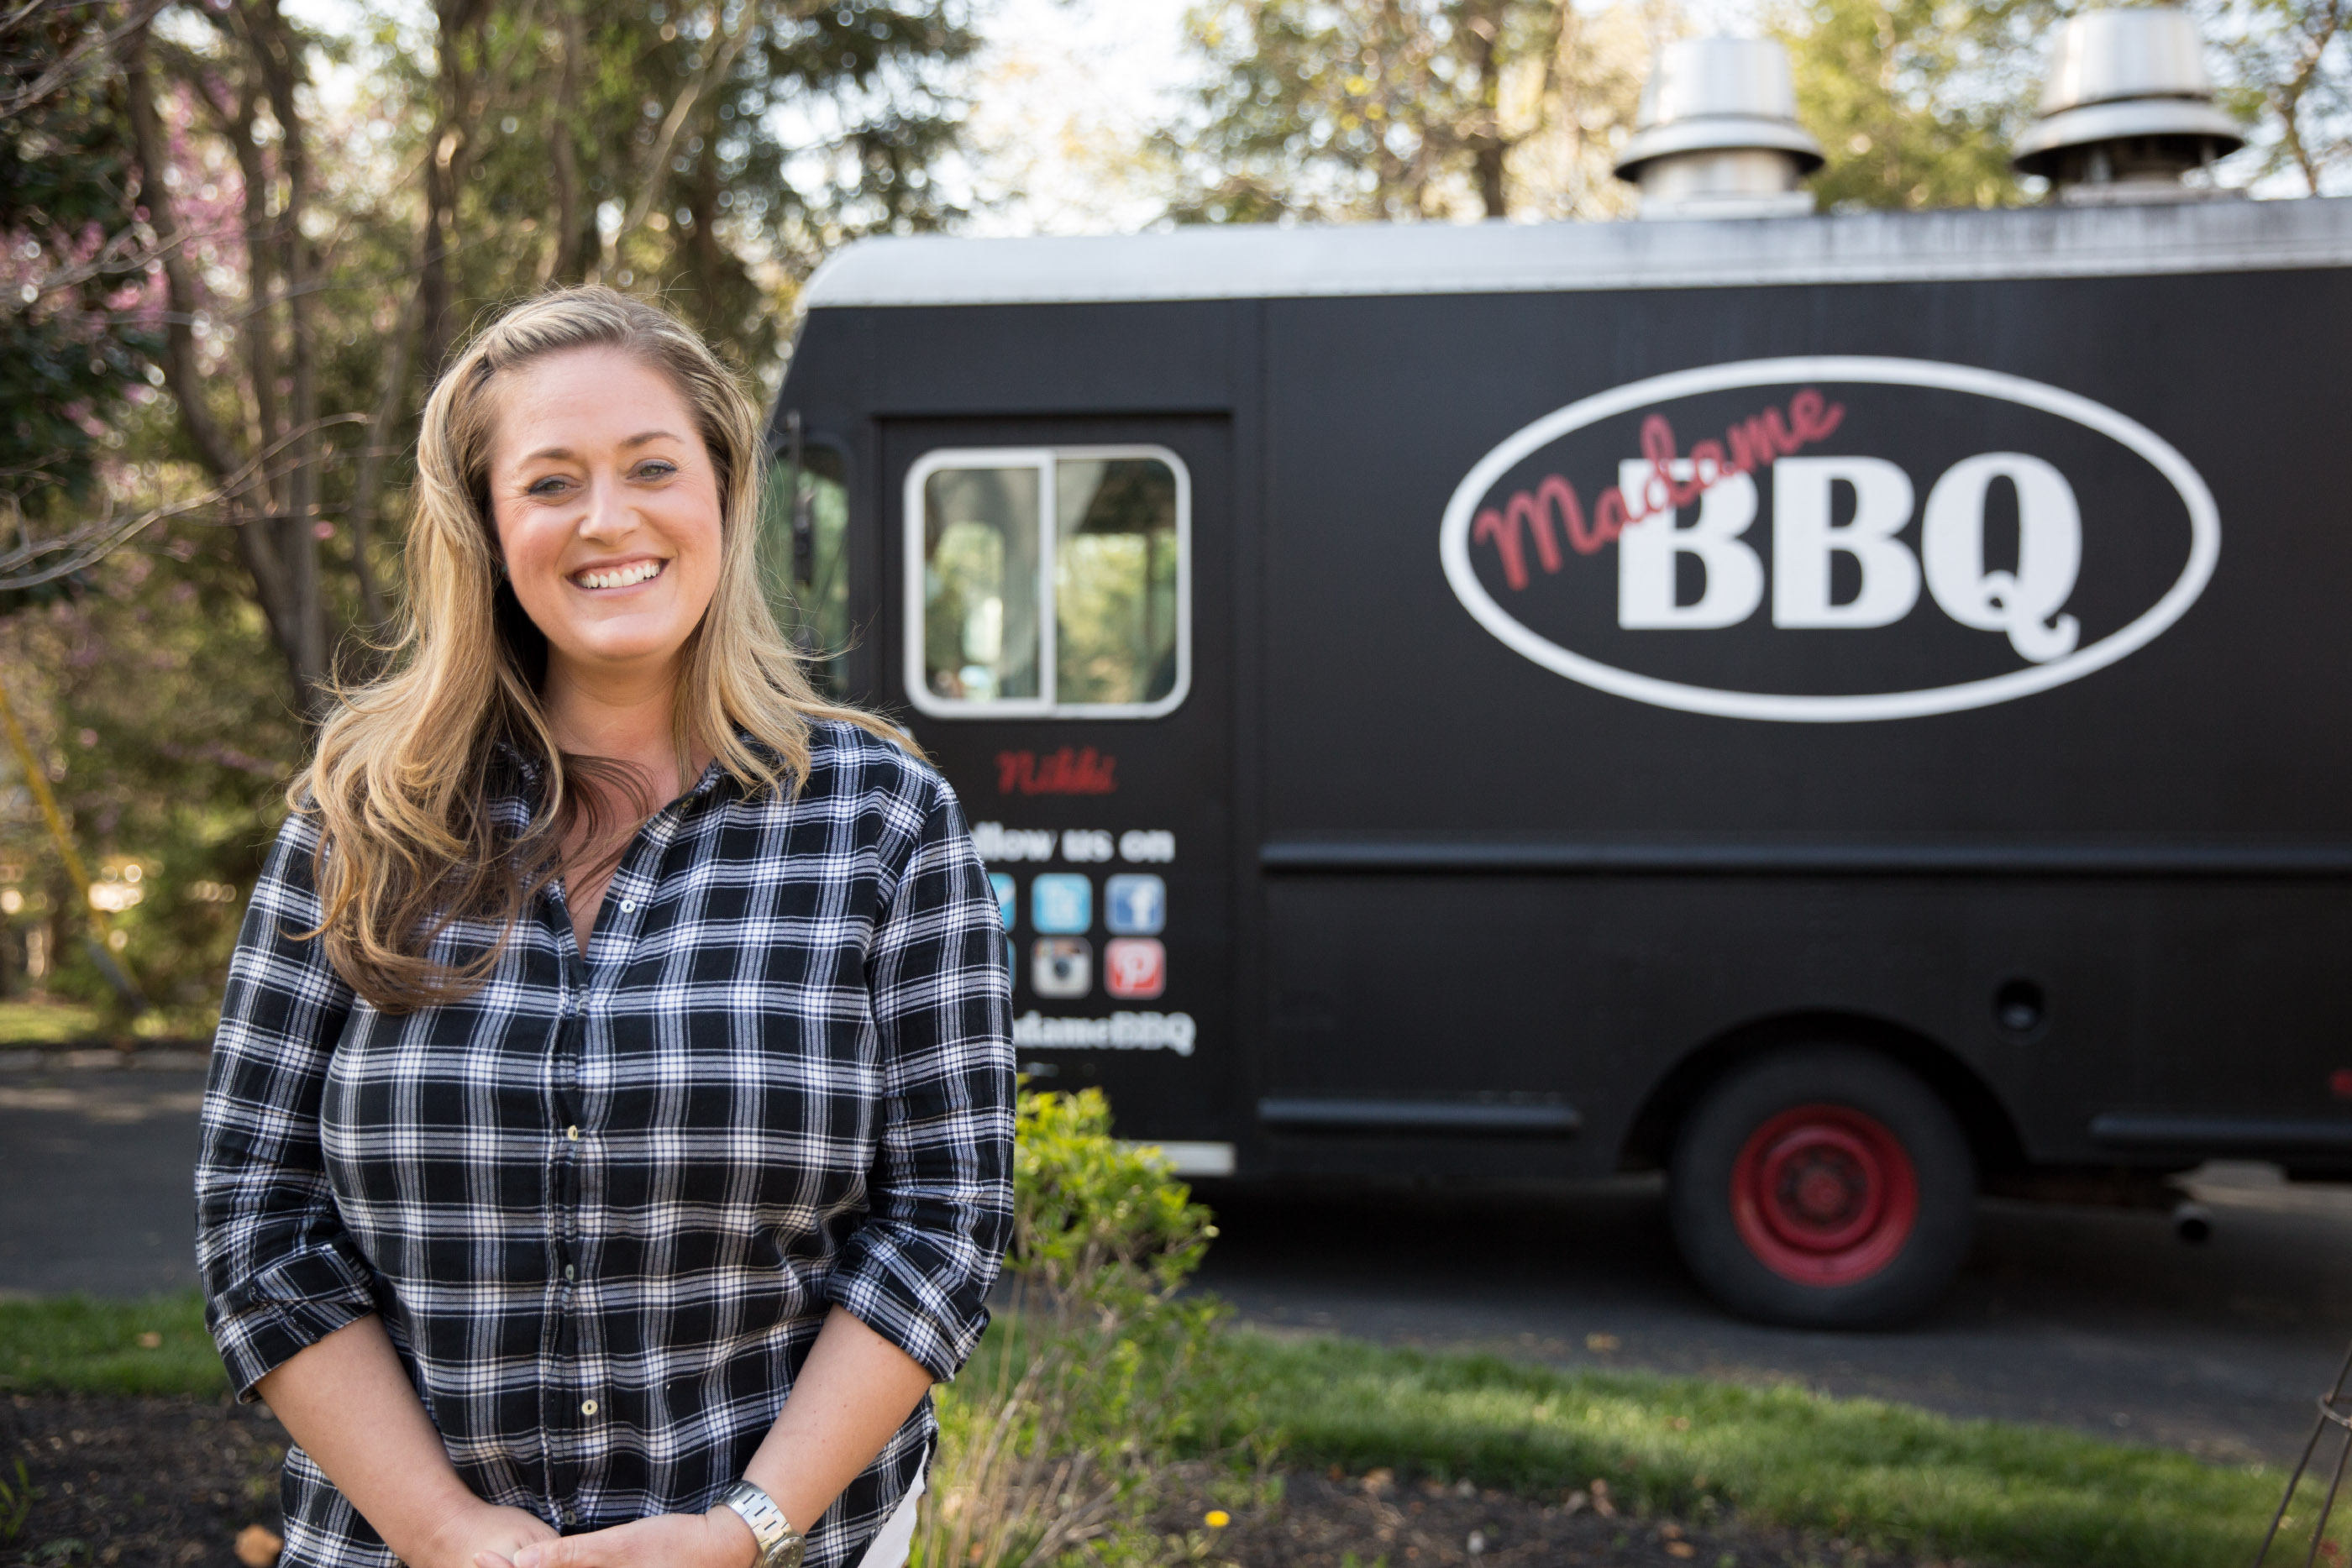 Nikki McGowan, owner of Madame BBQ, is challenging a Baltimore ordinance prohibiting her from parking her food truck within 300 feet of a restaurant that sells similar food. (Photo: Institute for Justice)